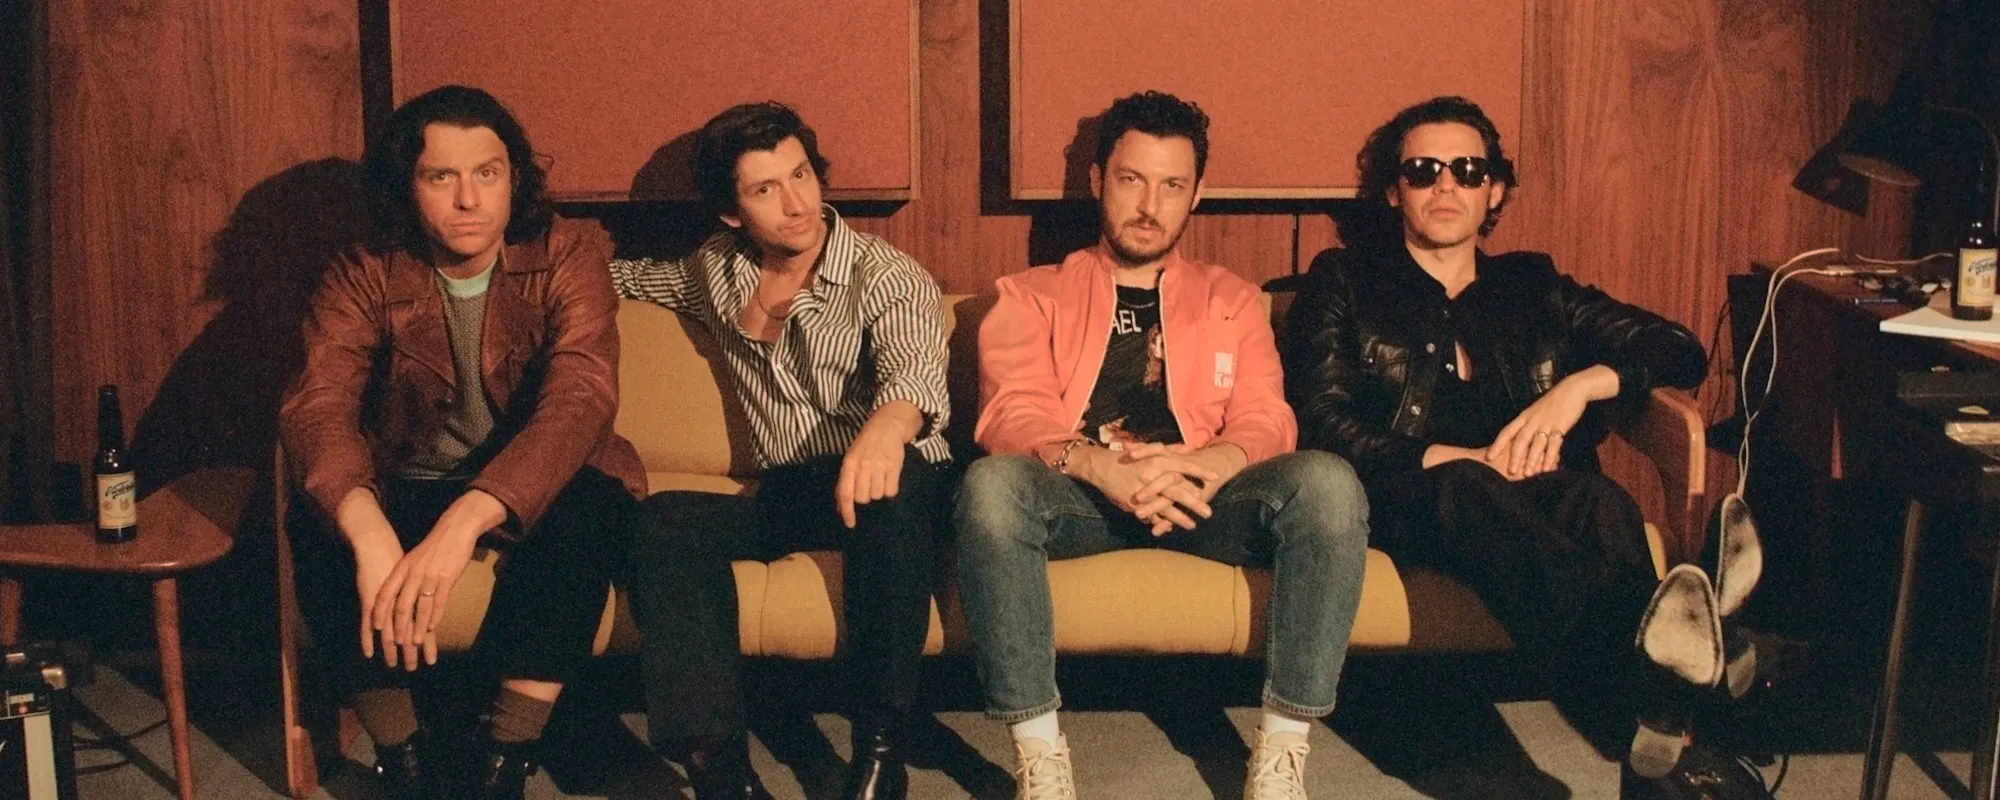 Arctic Monkeys Release Breakup Single ‘There’d Better Be A Mirrorball’